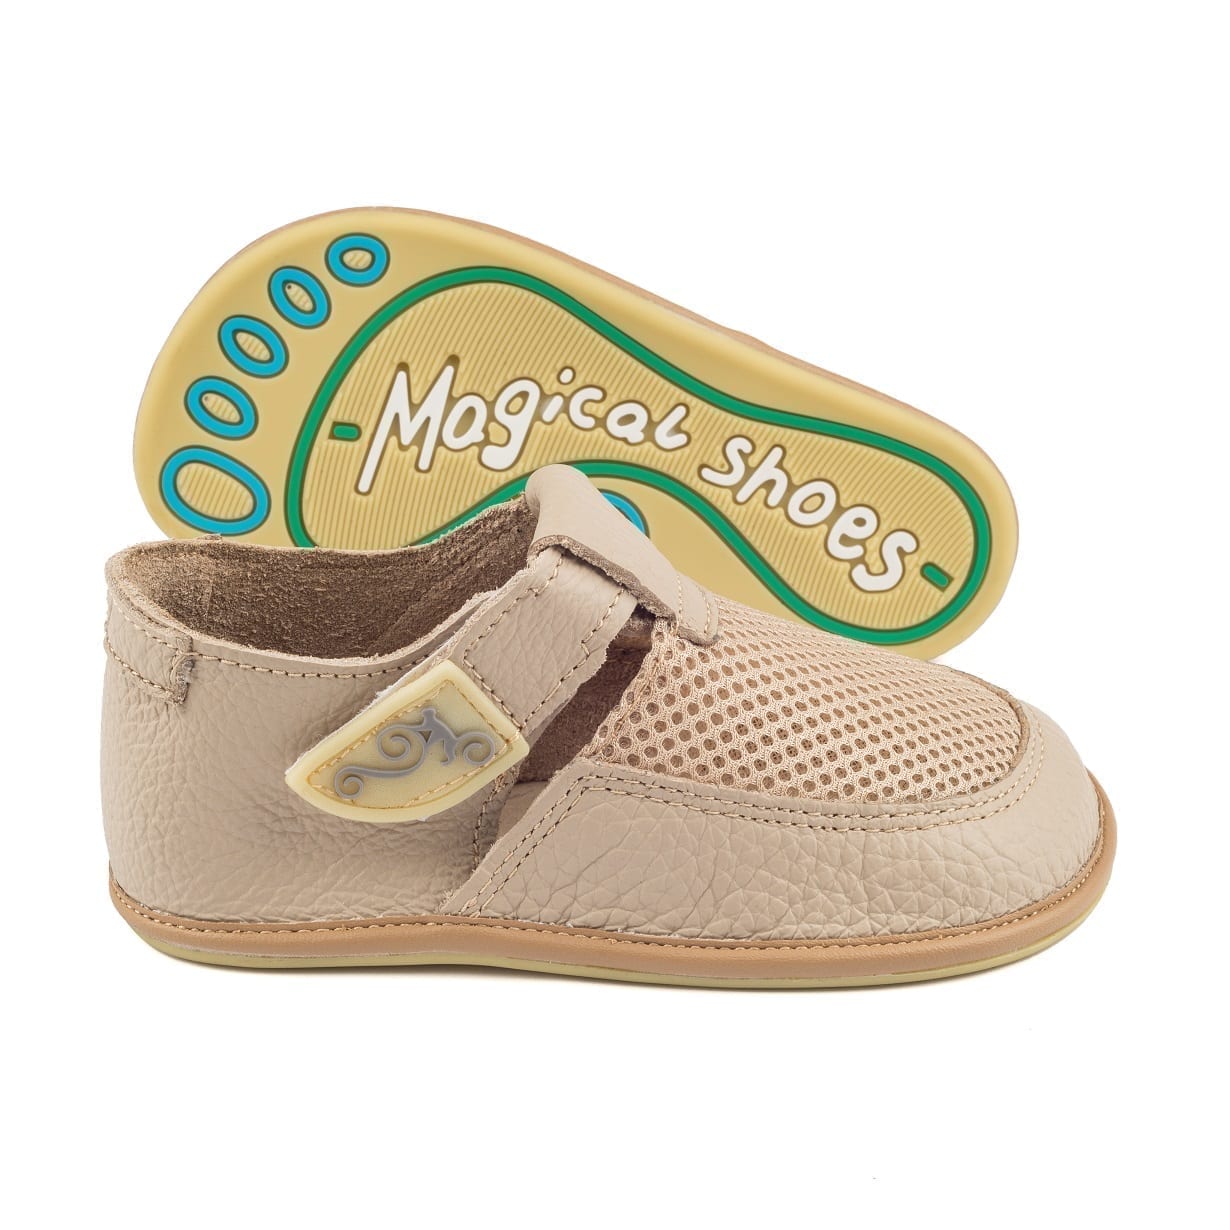 Barefoot shoes for kids